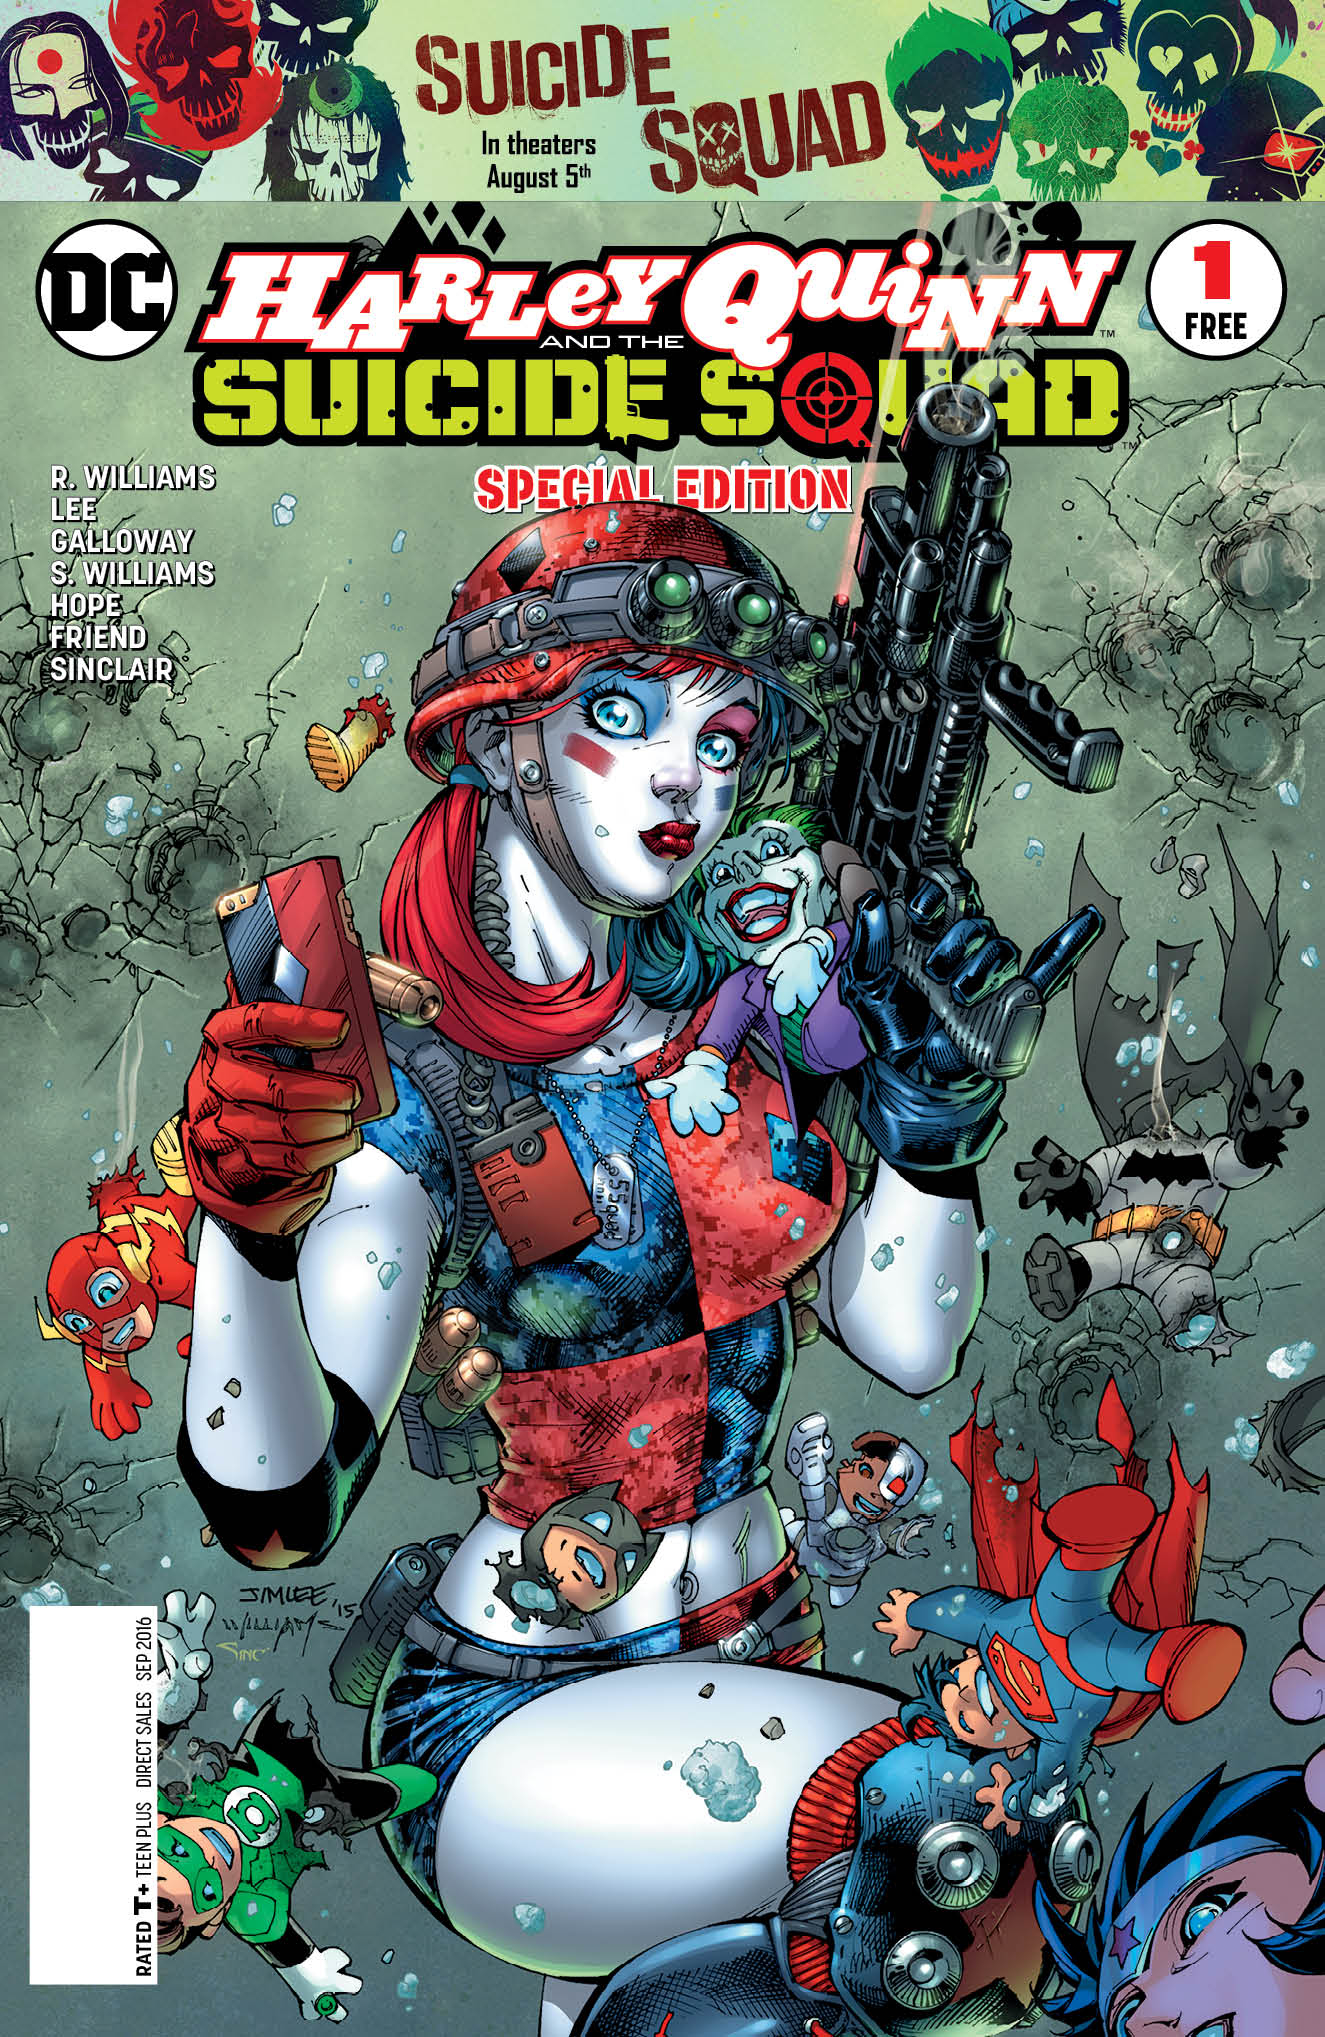 9.4 HARLEY QUINN AND SUICIDE SQUAD SPECIAL EDITION #1 DC SEPTEMBER 2016 NM